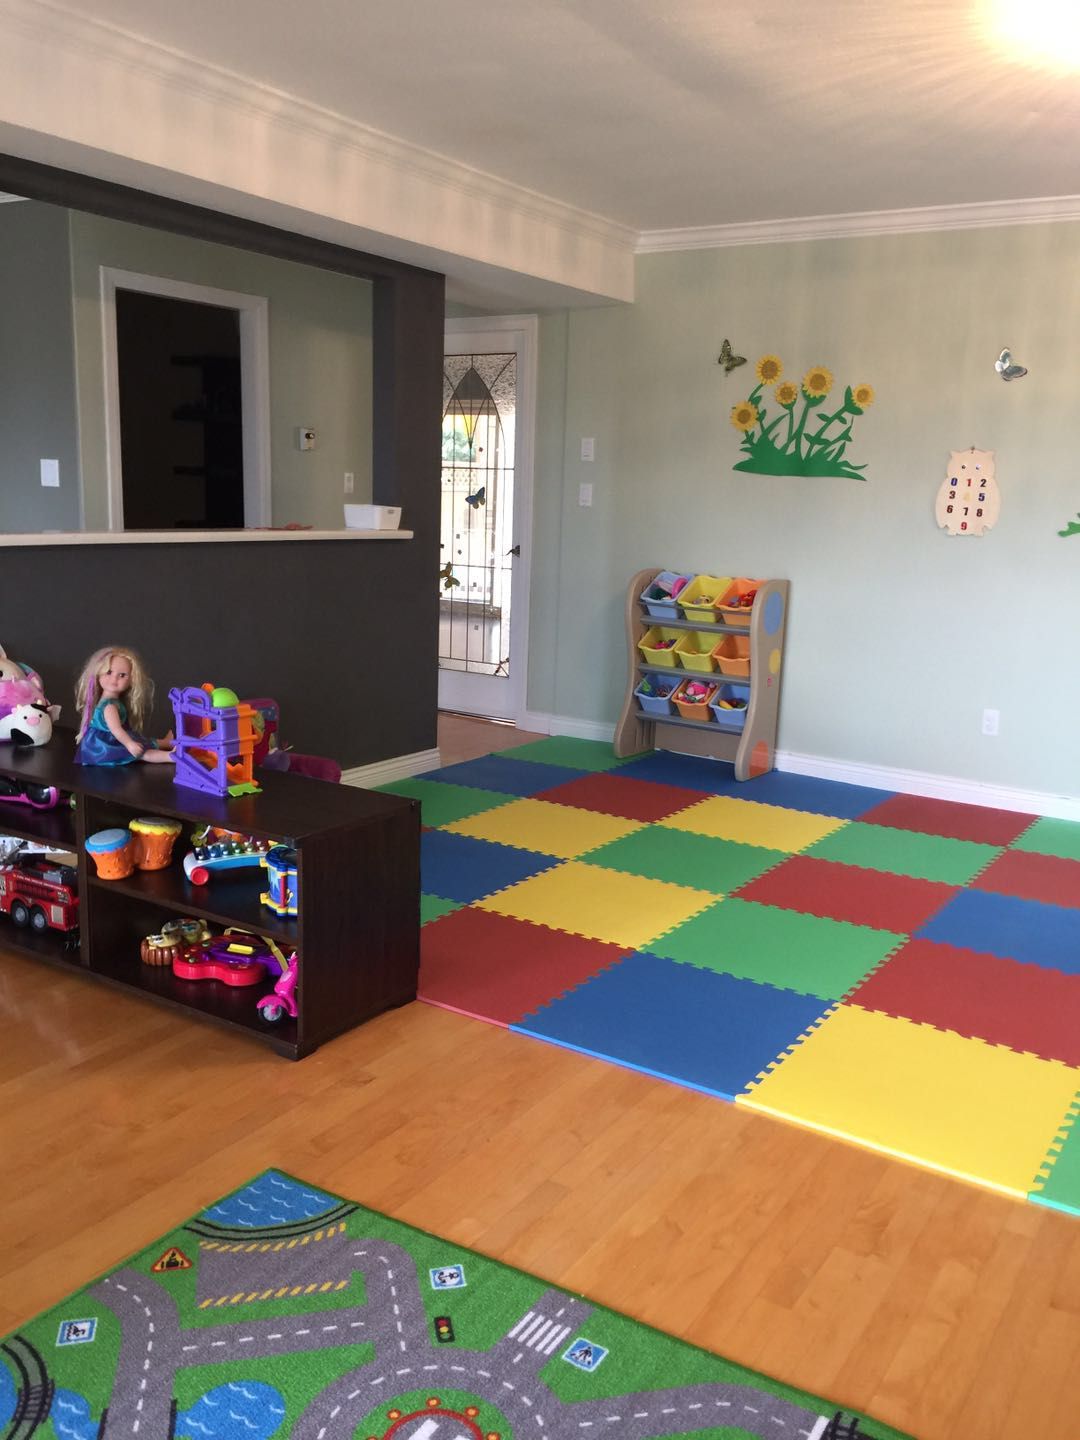 Daycare playing area